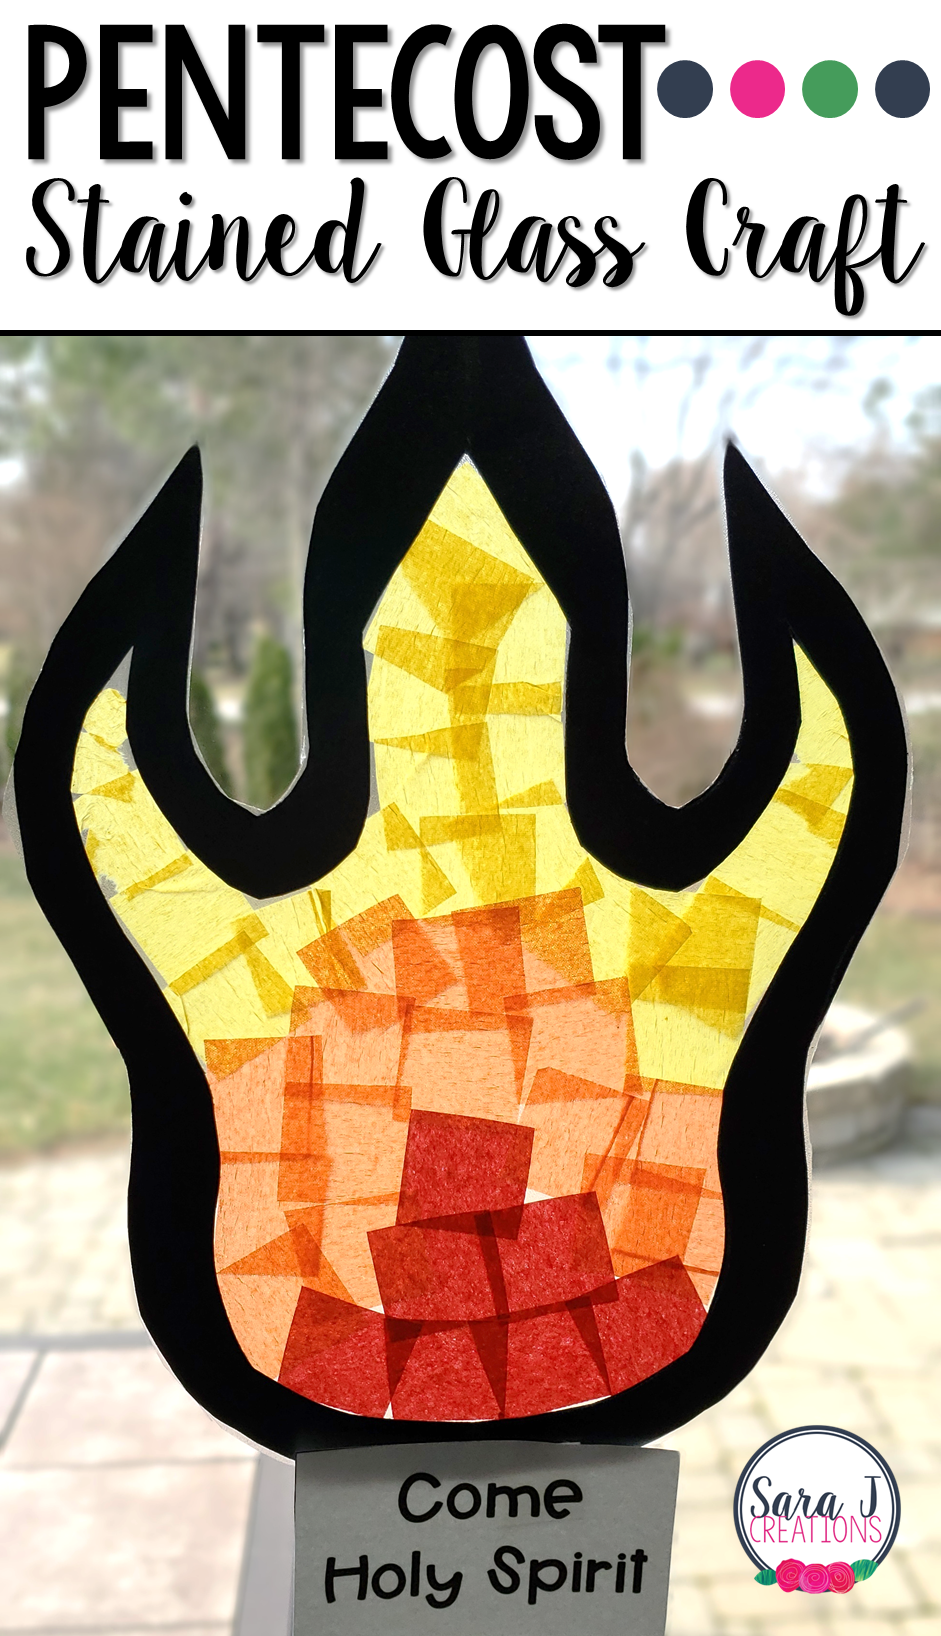 Check out this stained glass flame craft for learning about Pentecost.